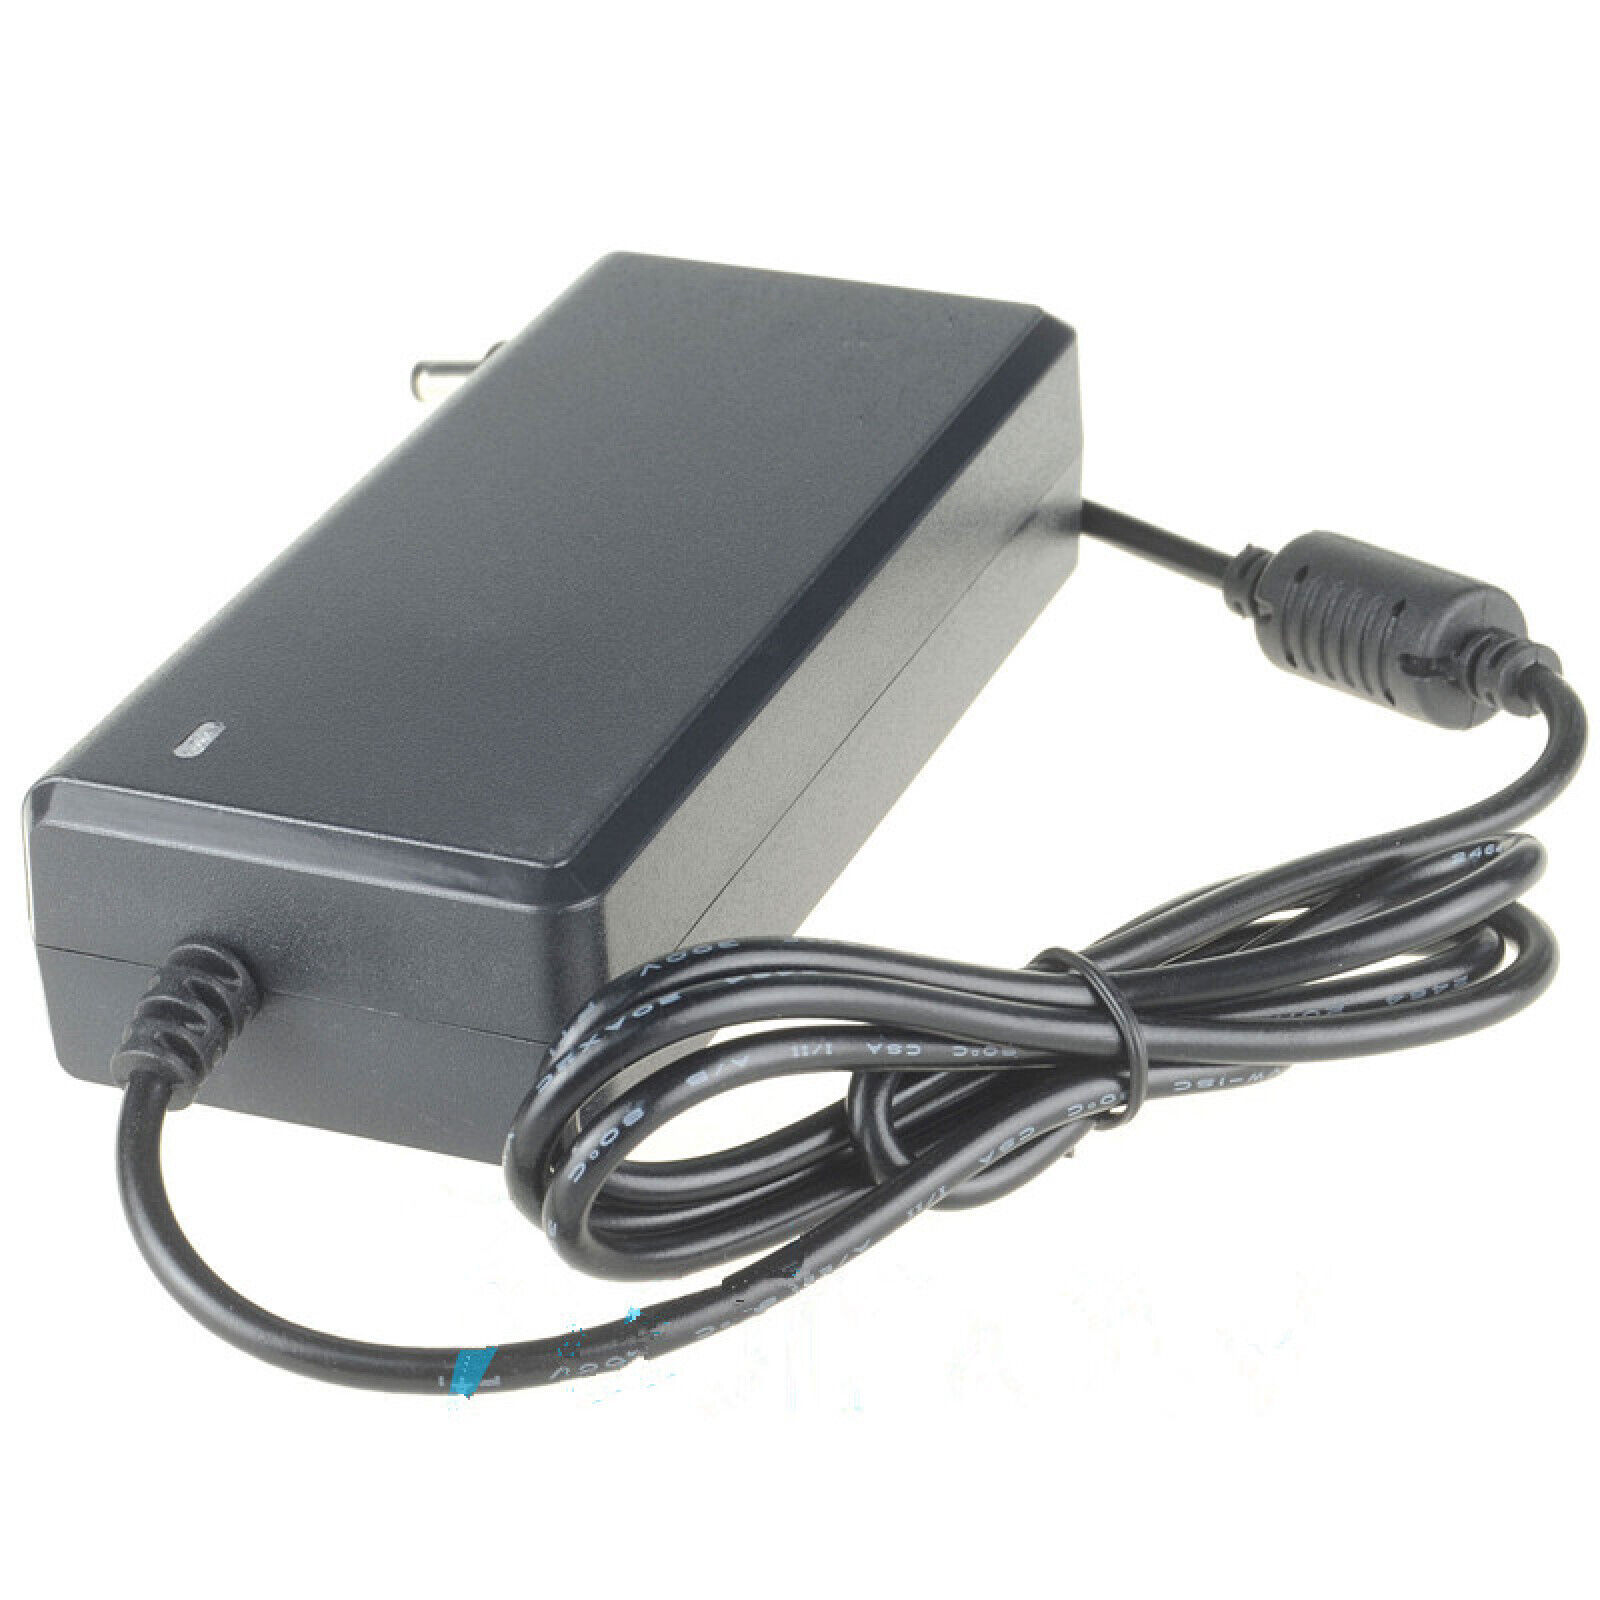 100V-240V 50/60Hz AC to DC Power Adapter Charger Supply For PoE Switch Injector